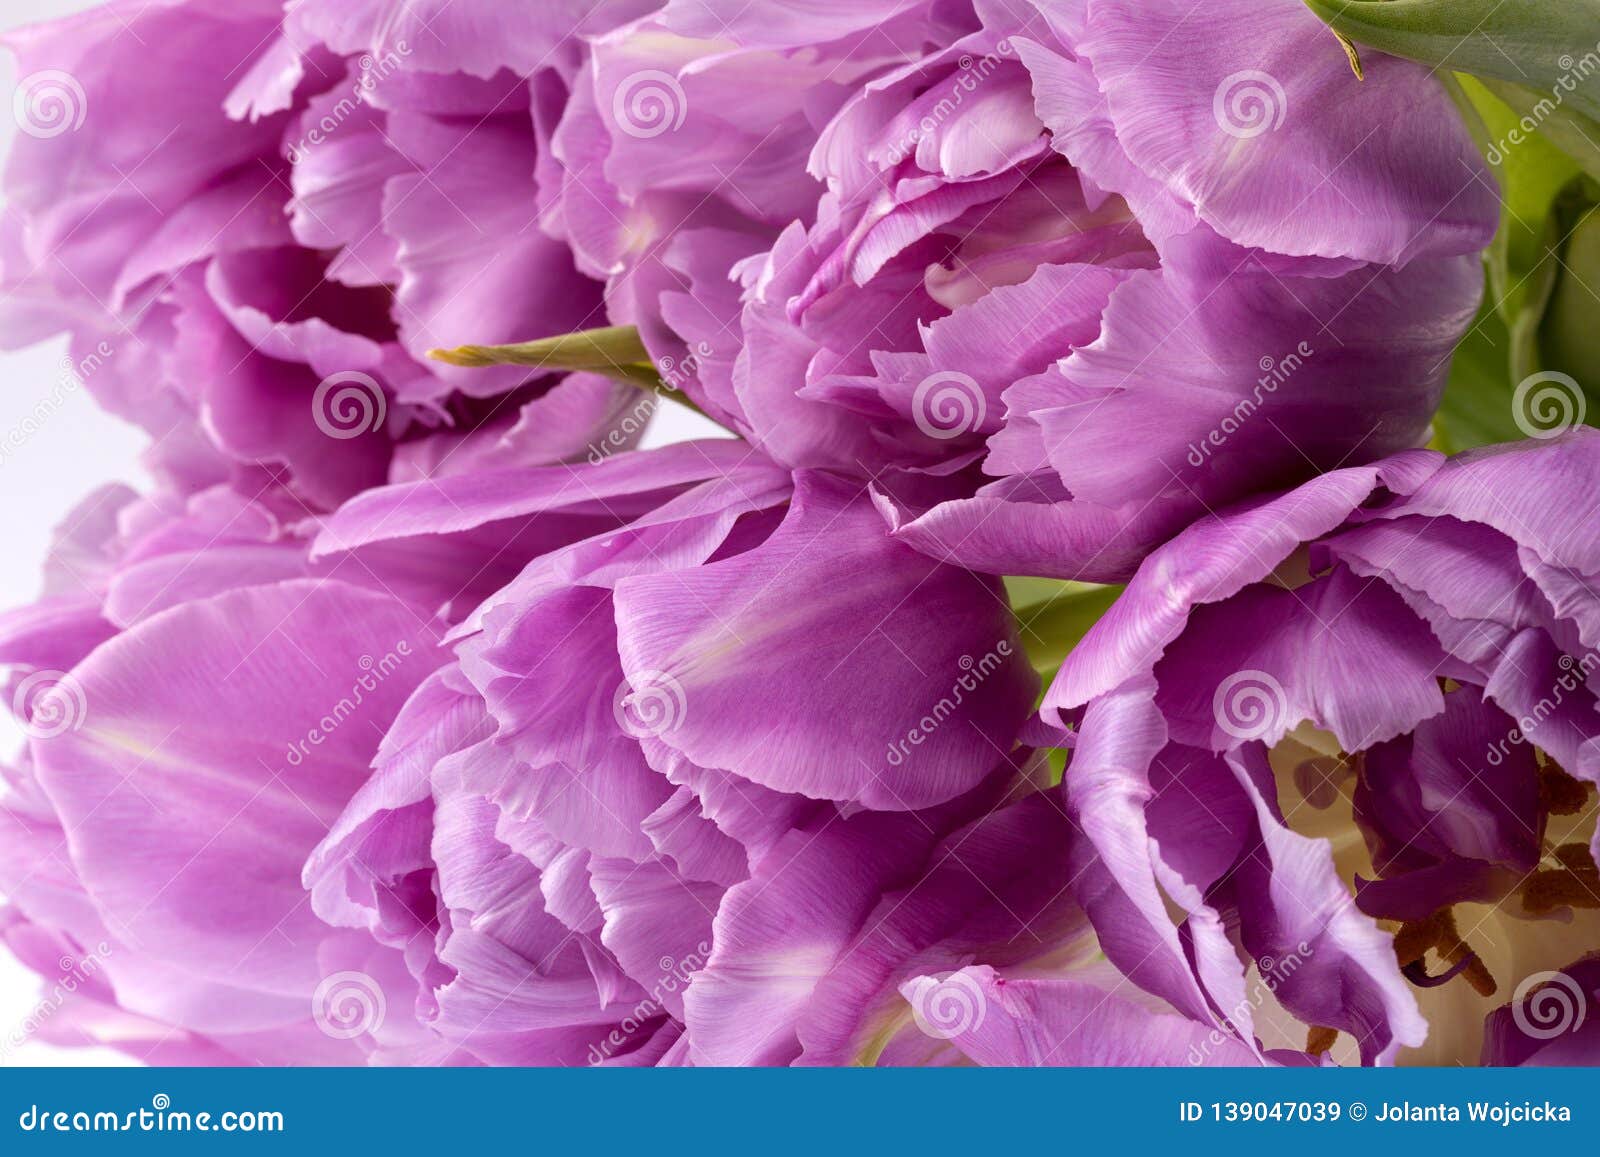 Bouqet of Pink Tulip Flowers, Close Up Stock Image - Image of gift ...